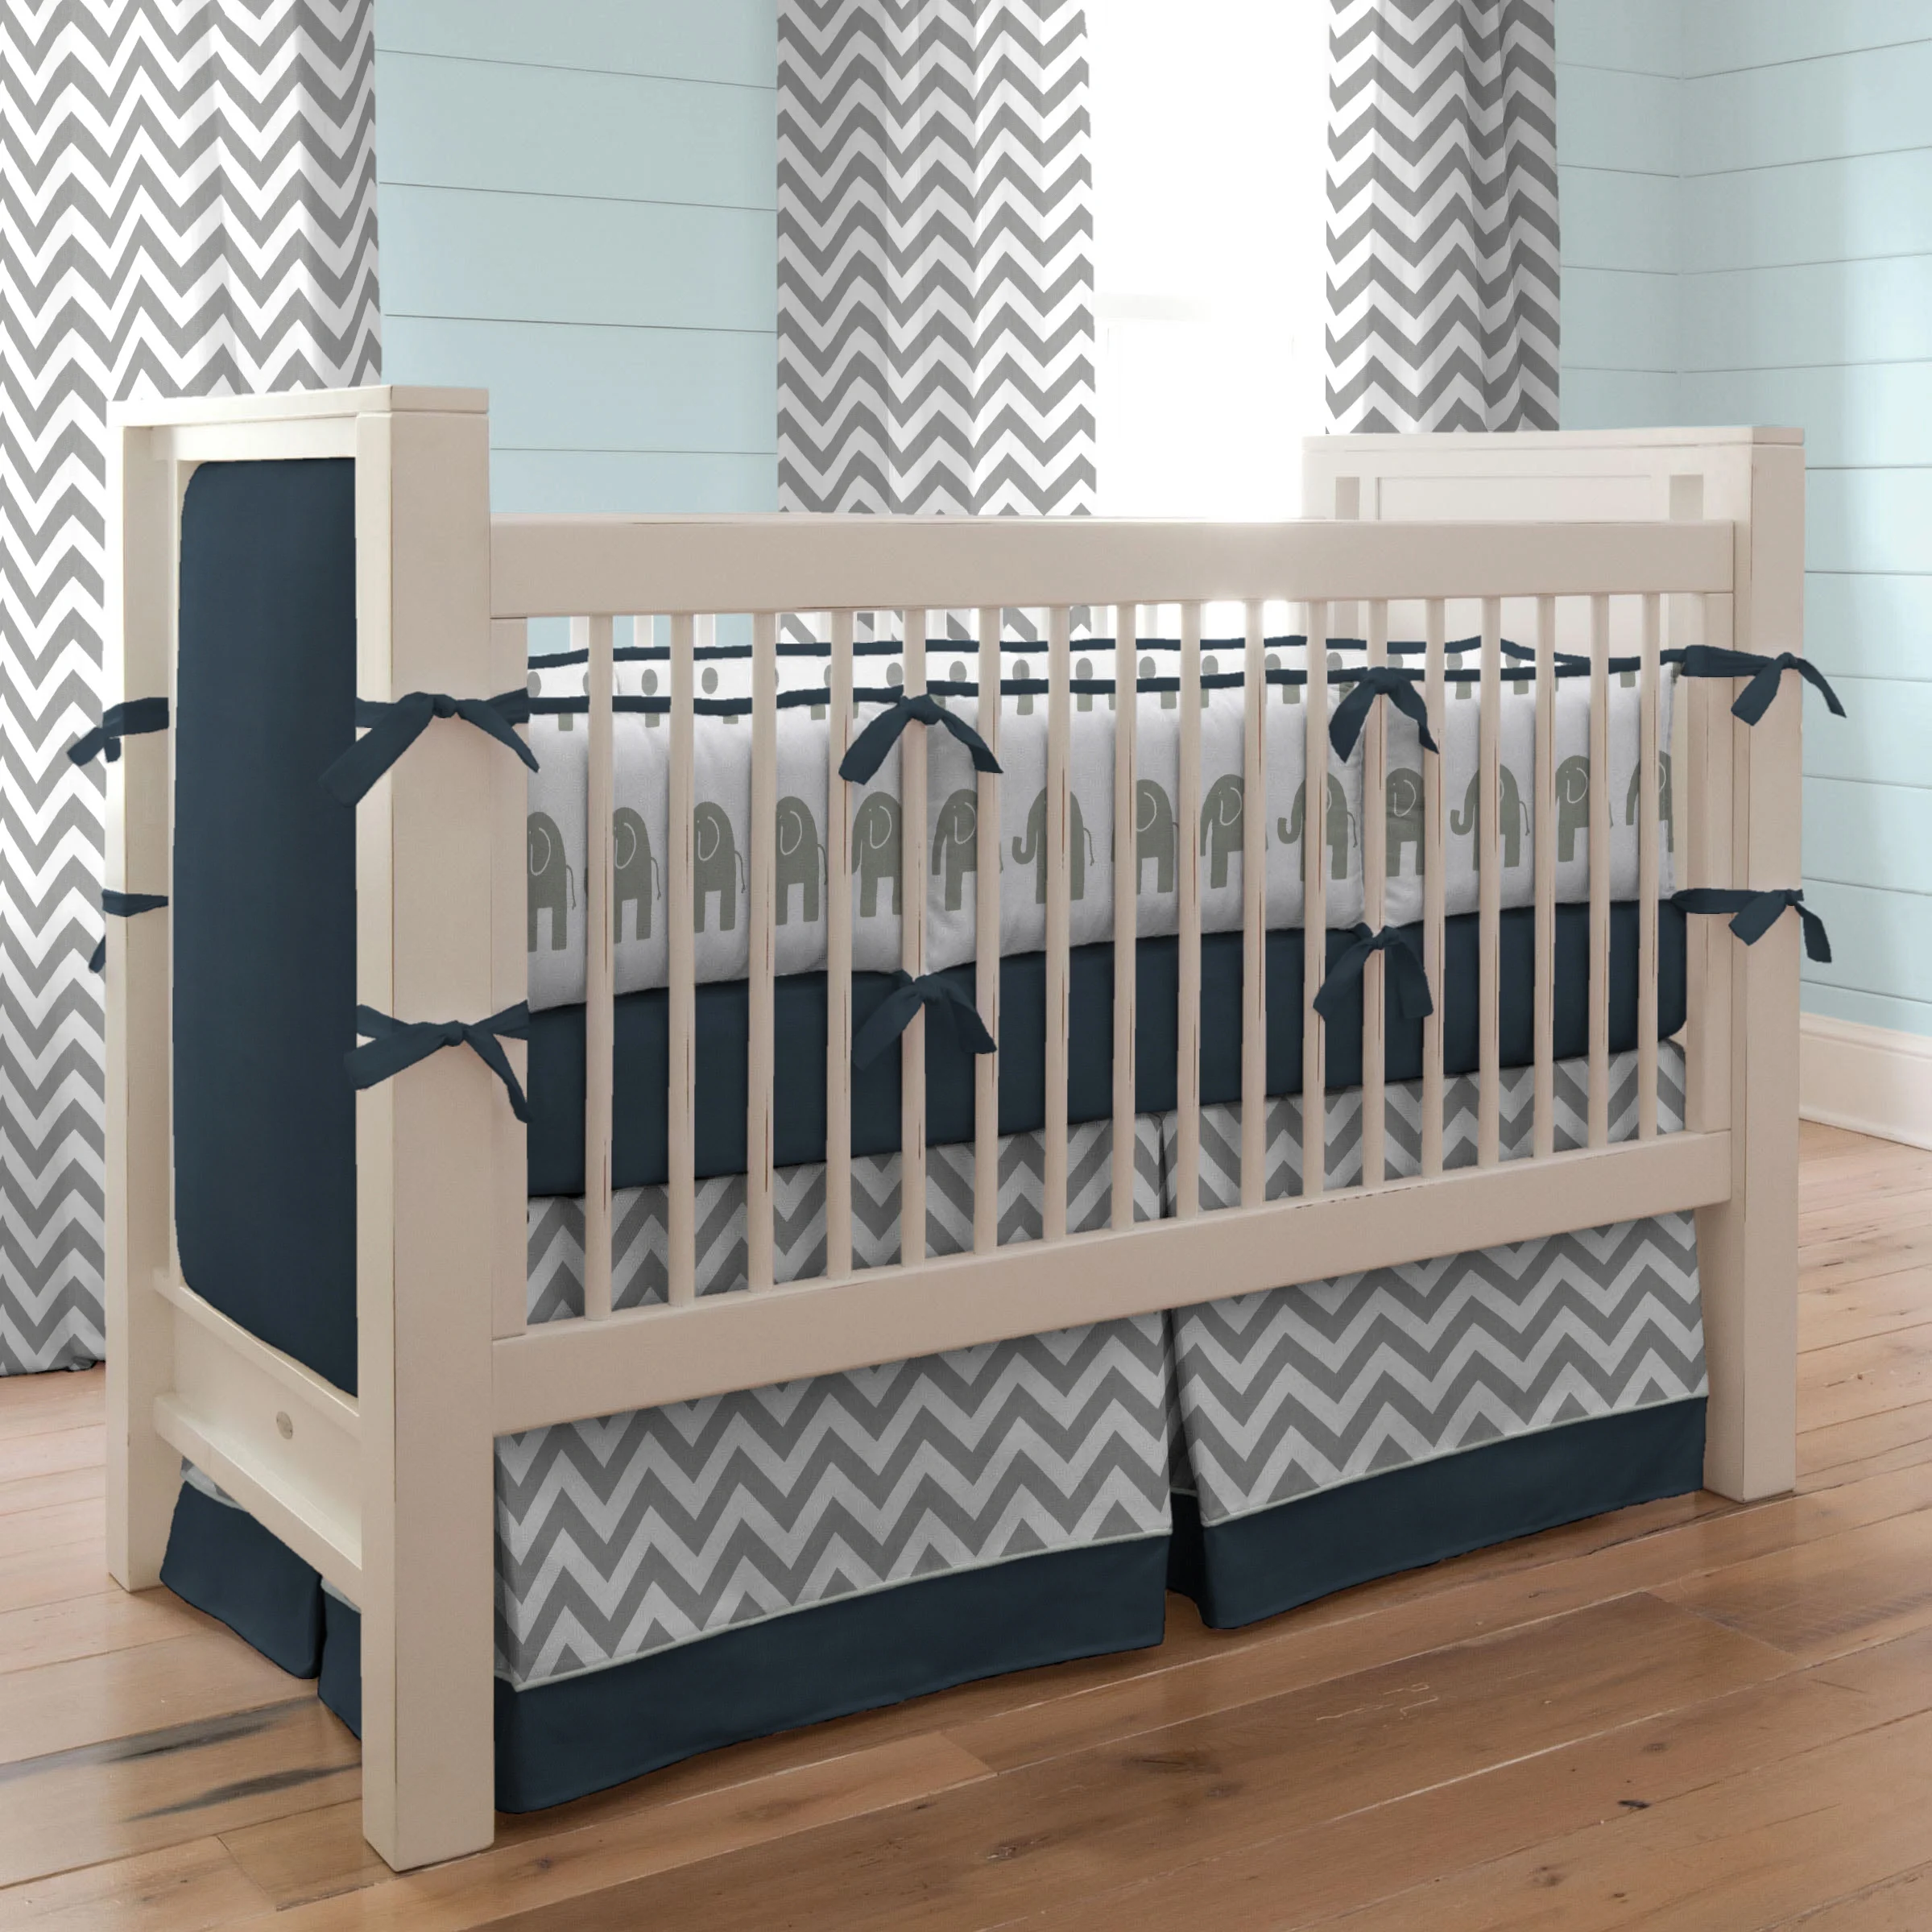 Navy and Gray Elephants Crib Bedding from Carousel Designs